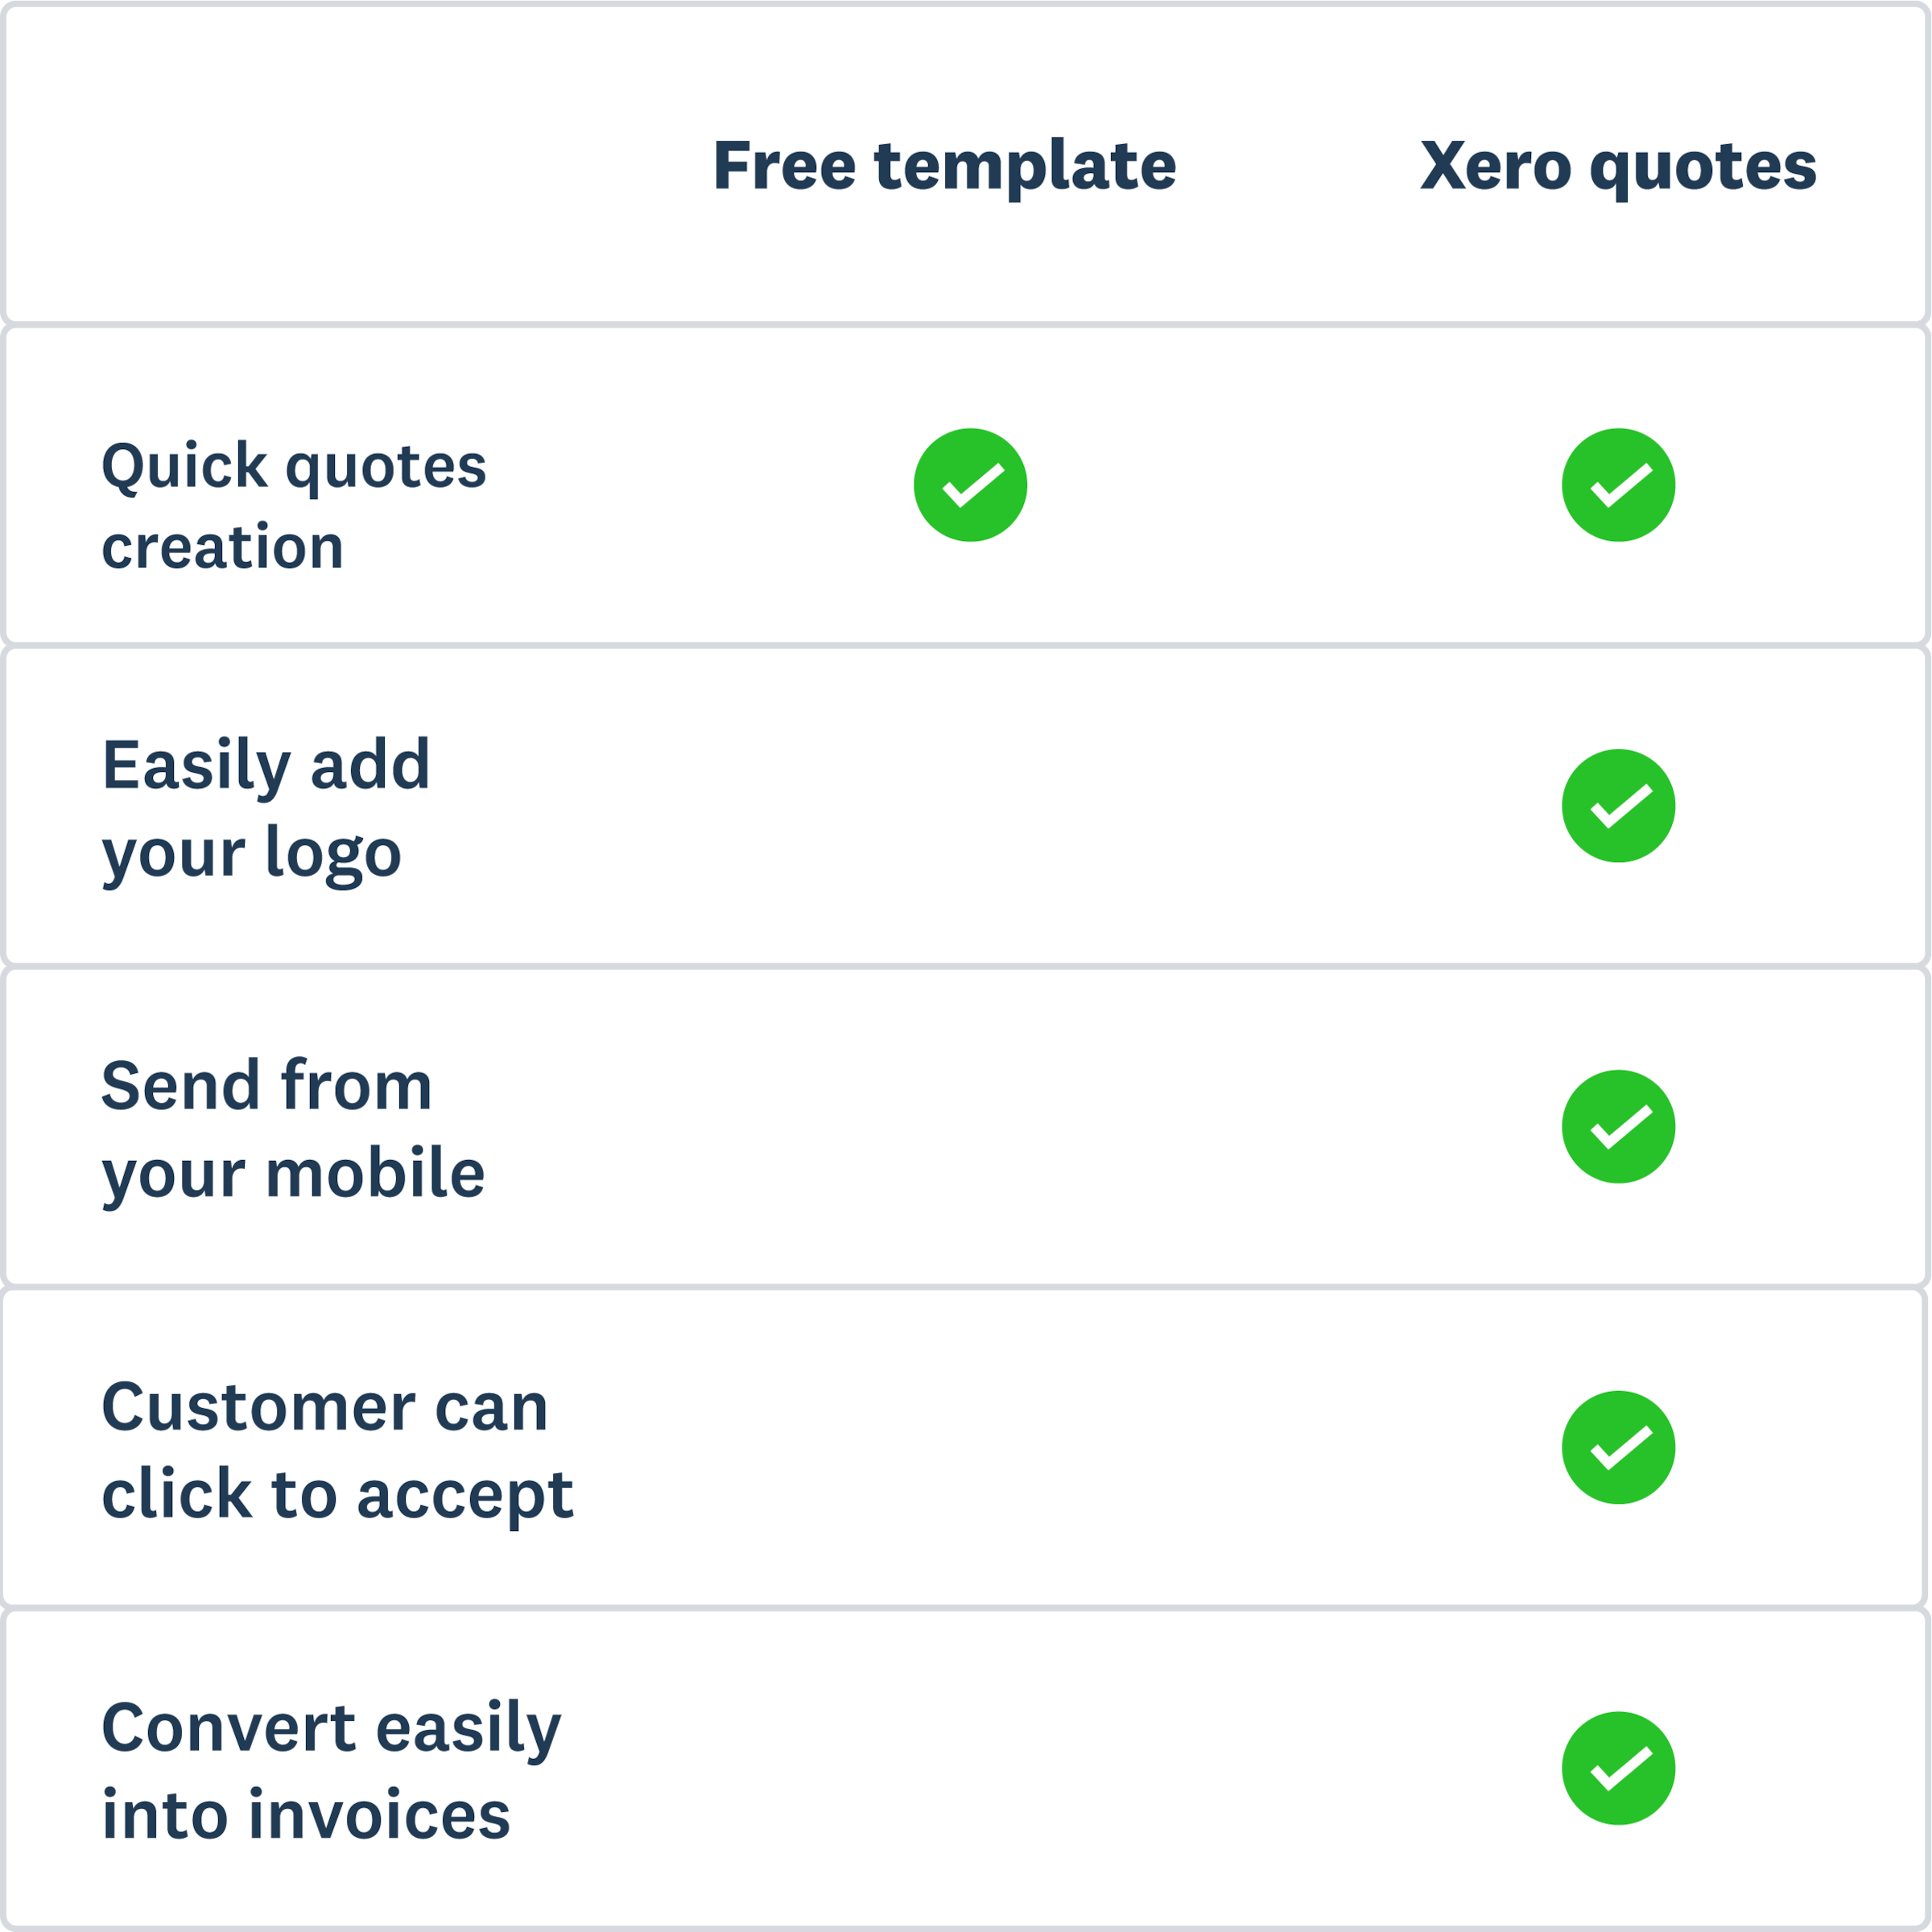 Table shows Xero makes it easy to send quotes with a logo, and convert them to invoices when customers click accept. 